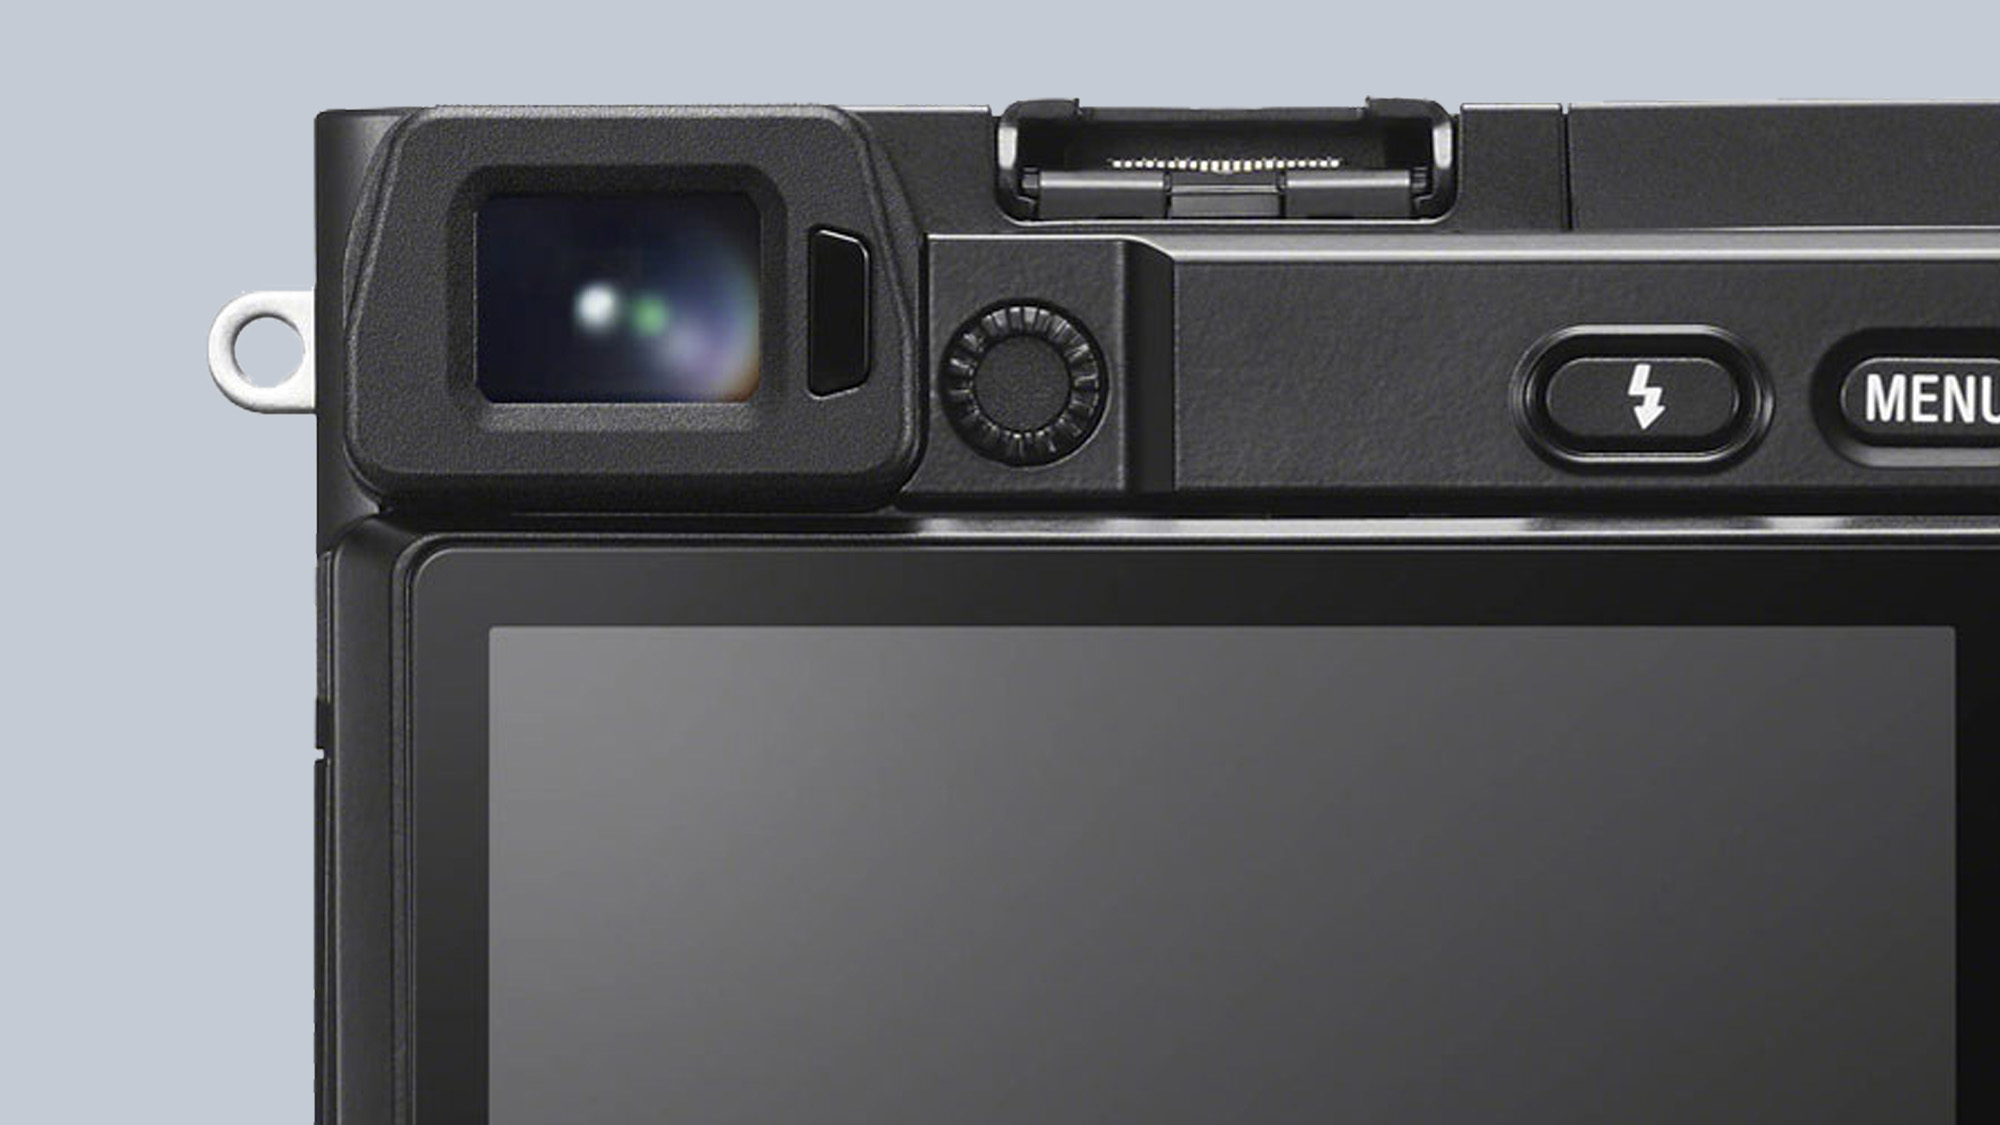 The Sony A6100 Camera Viewfinder